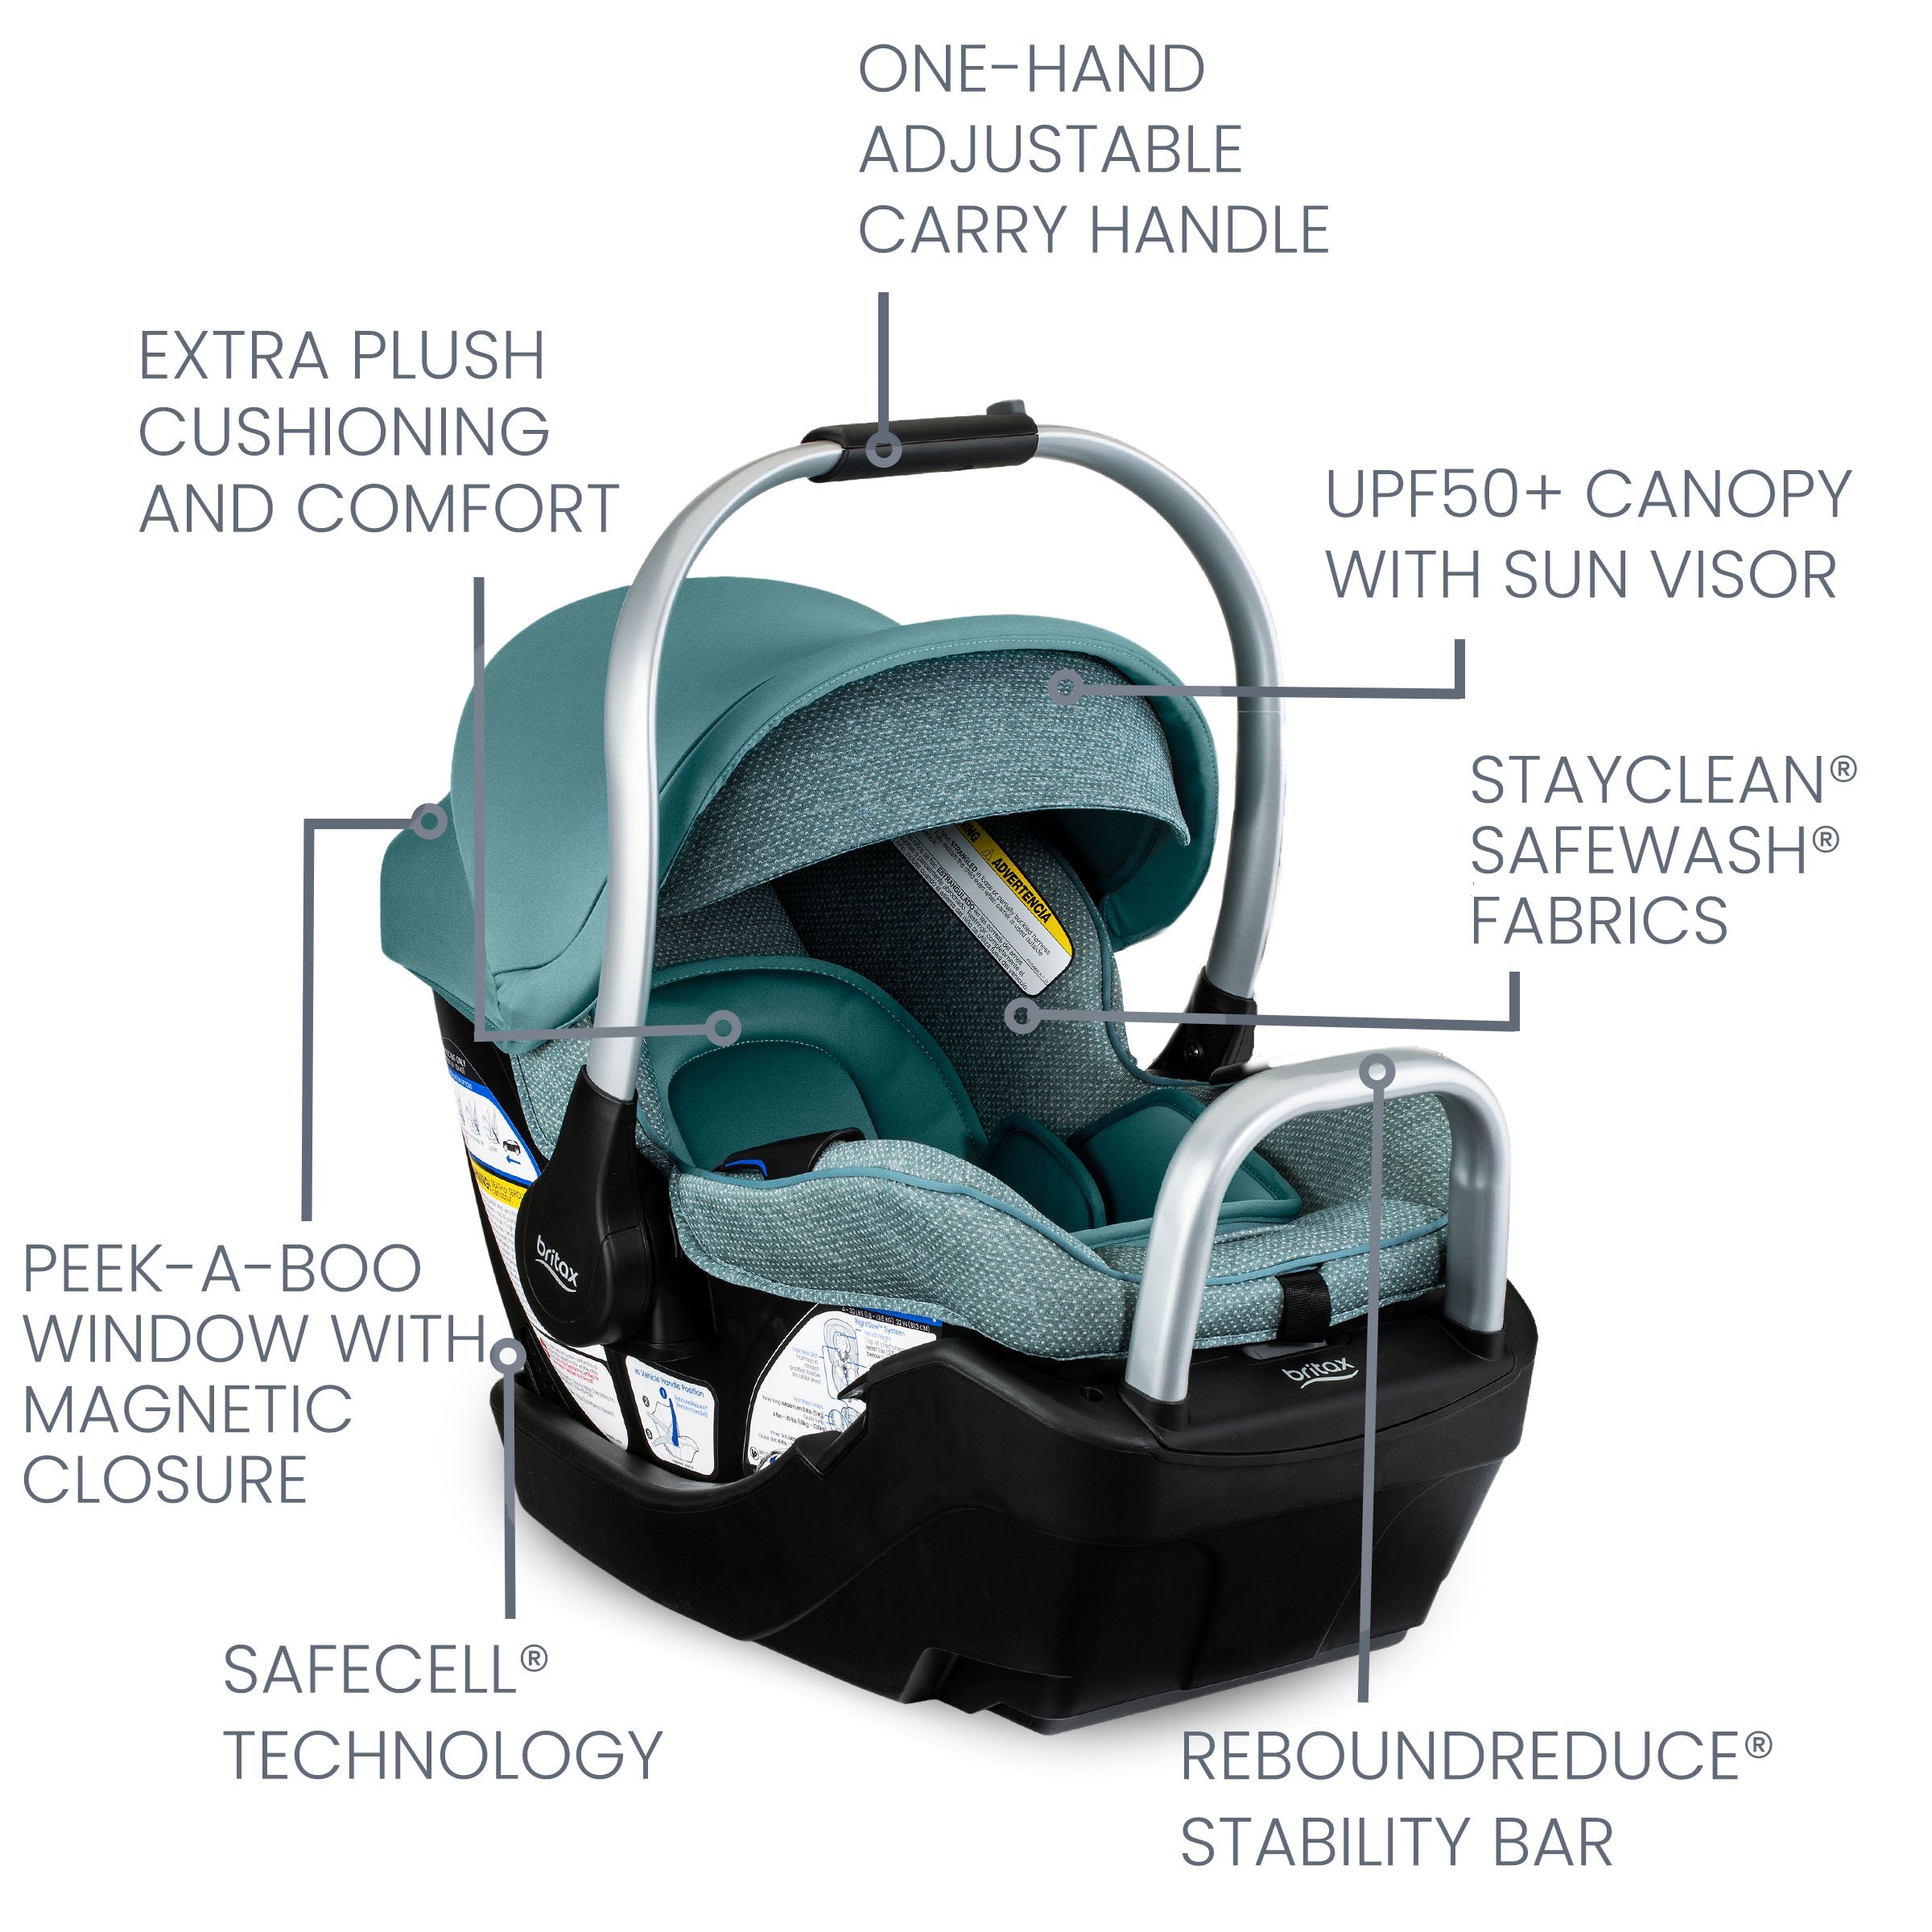 Infant Car Seat Features Labeled on Pindot Jade Fashion